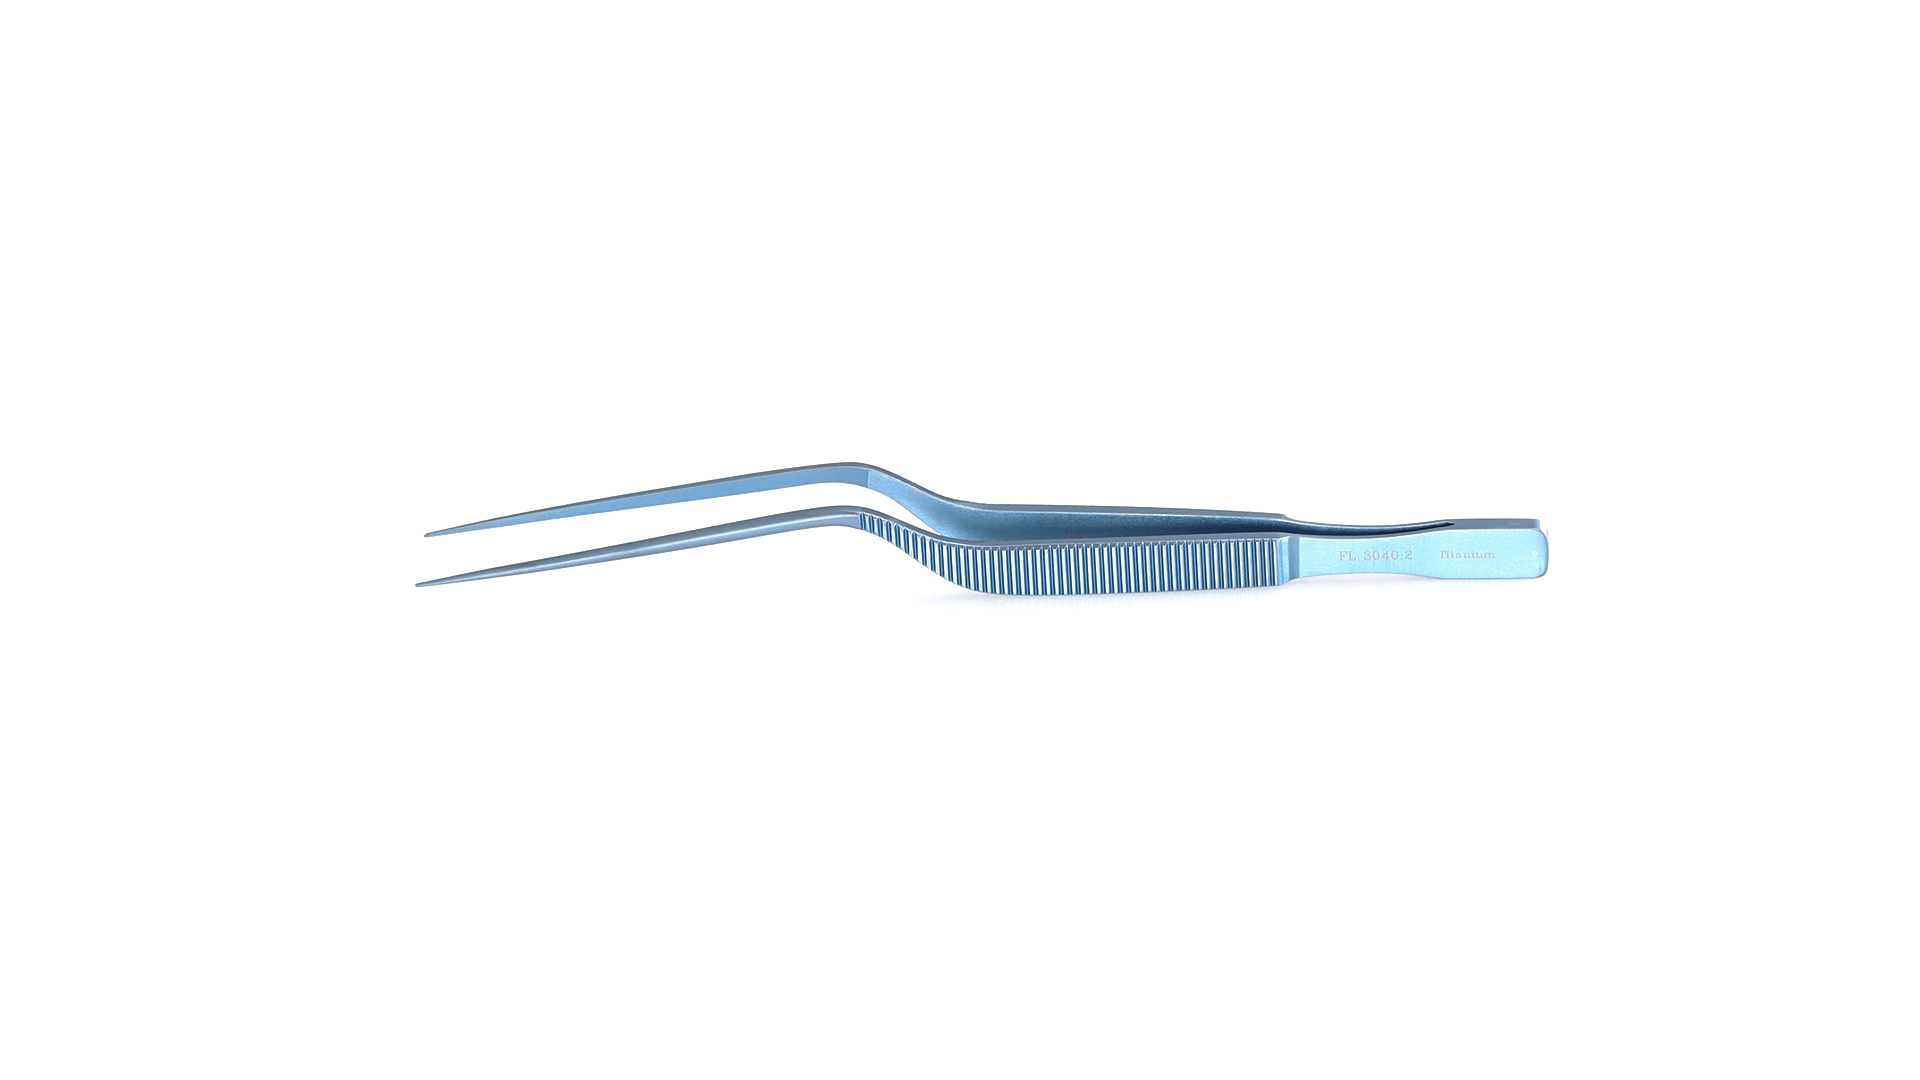 Micro Forceps - Straight 0.75mm blunt tips